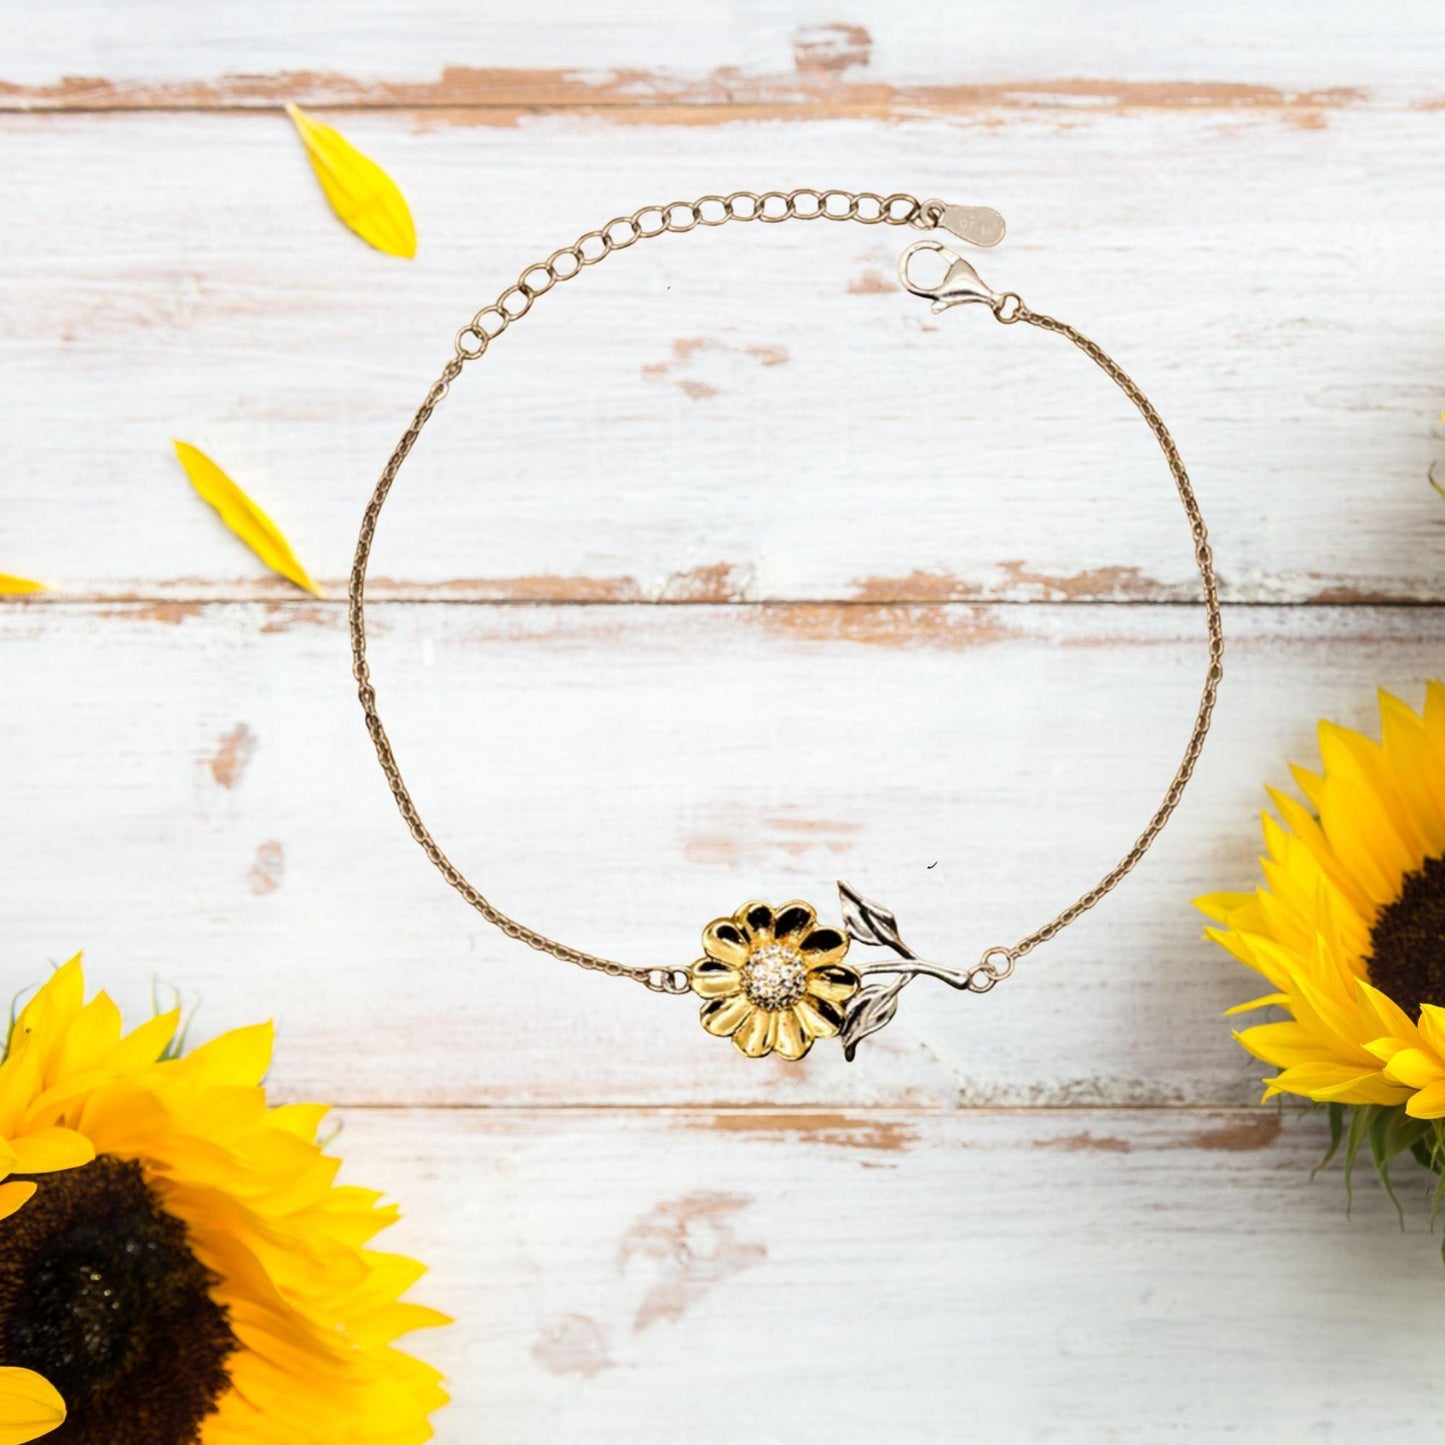 Wife Sunflower Bracelet Gifts, To My Wife You are braver than you believe, stronger than you seem, Inspirational Gifts For Wife Card, Birthday, Christmas Gifts For Wife Men Women - Mallard Moon Gift Shop